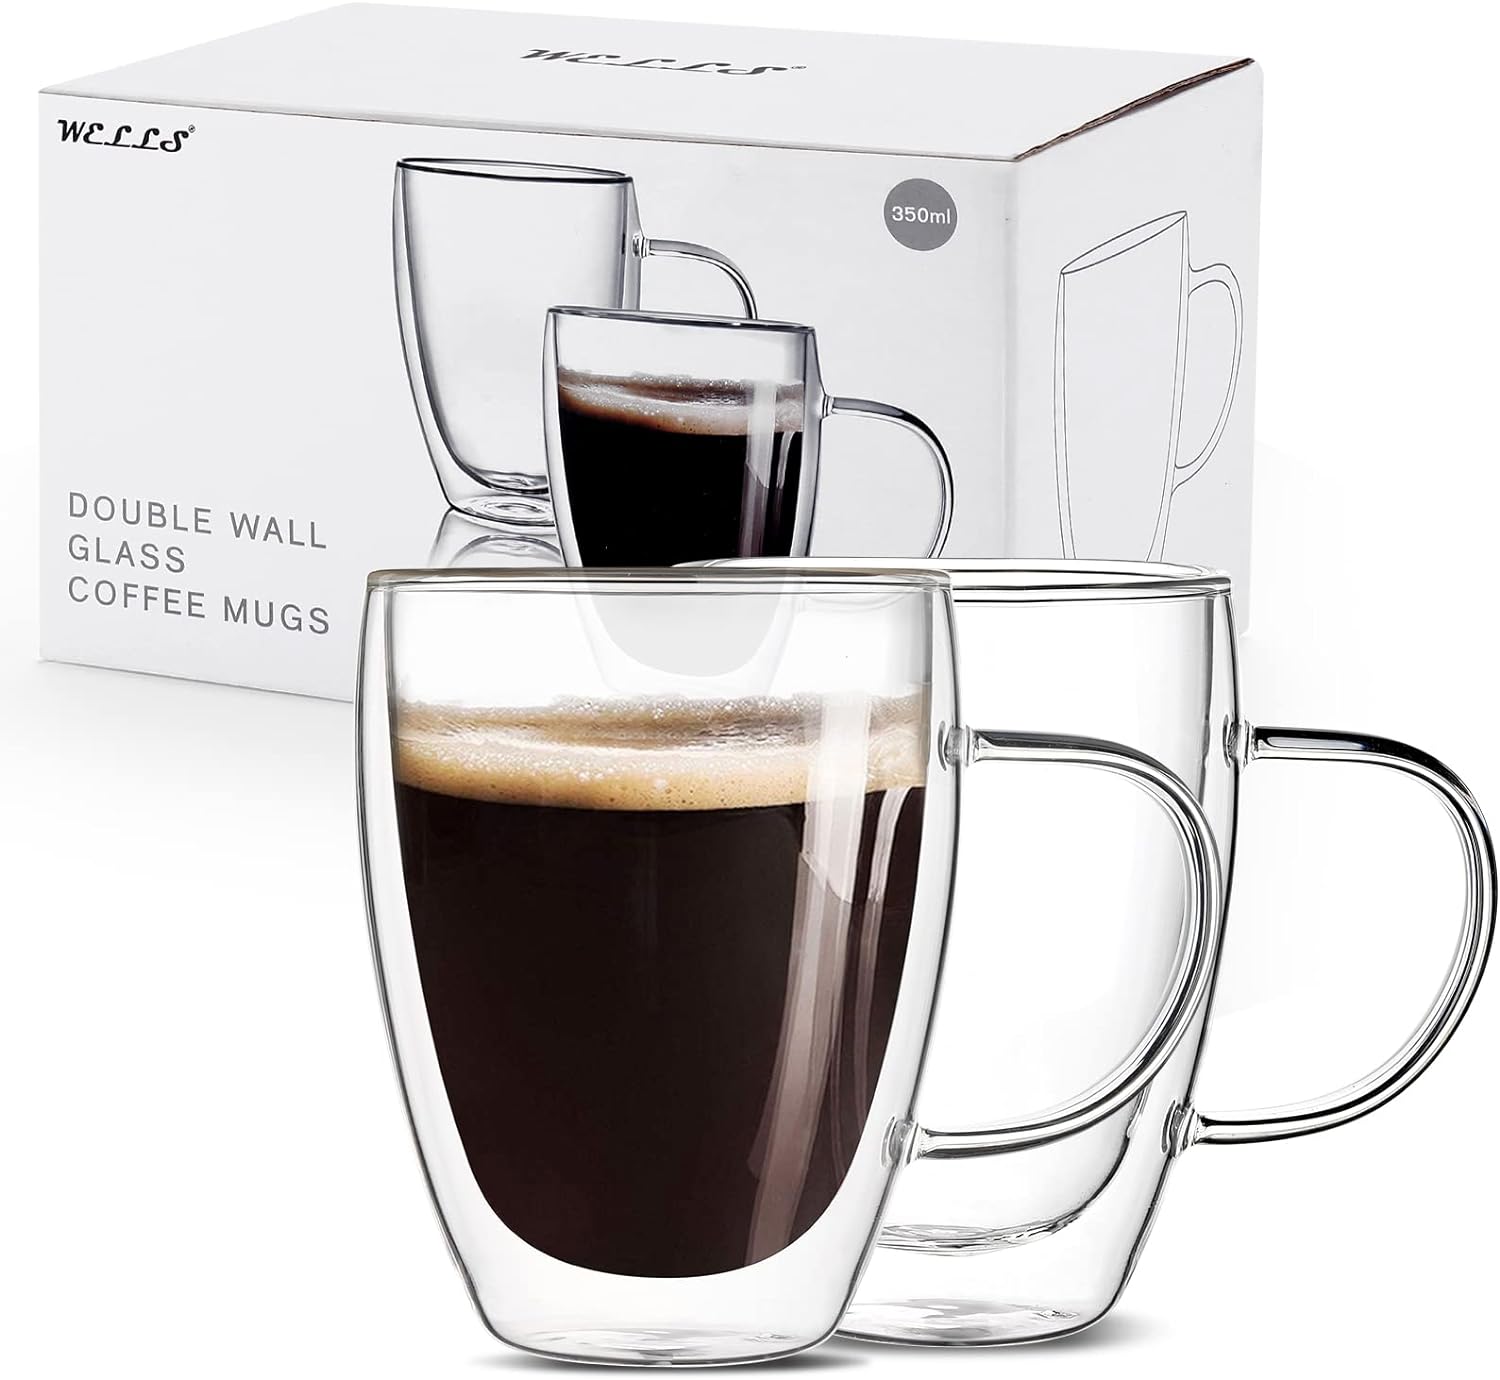 12 Oz Double Walled Glass Coffee Mugs with Handle Set of 2,Insulated Layer Coffee Cups,Clear Borosilicate Glass Mugs,Christmas Gift for Cappuccino,Tea,Latte,Espresso,Hot Beverage,Wine